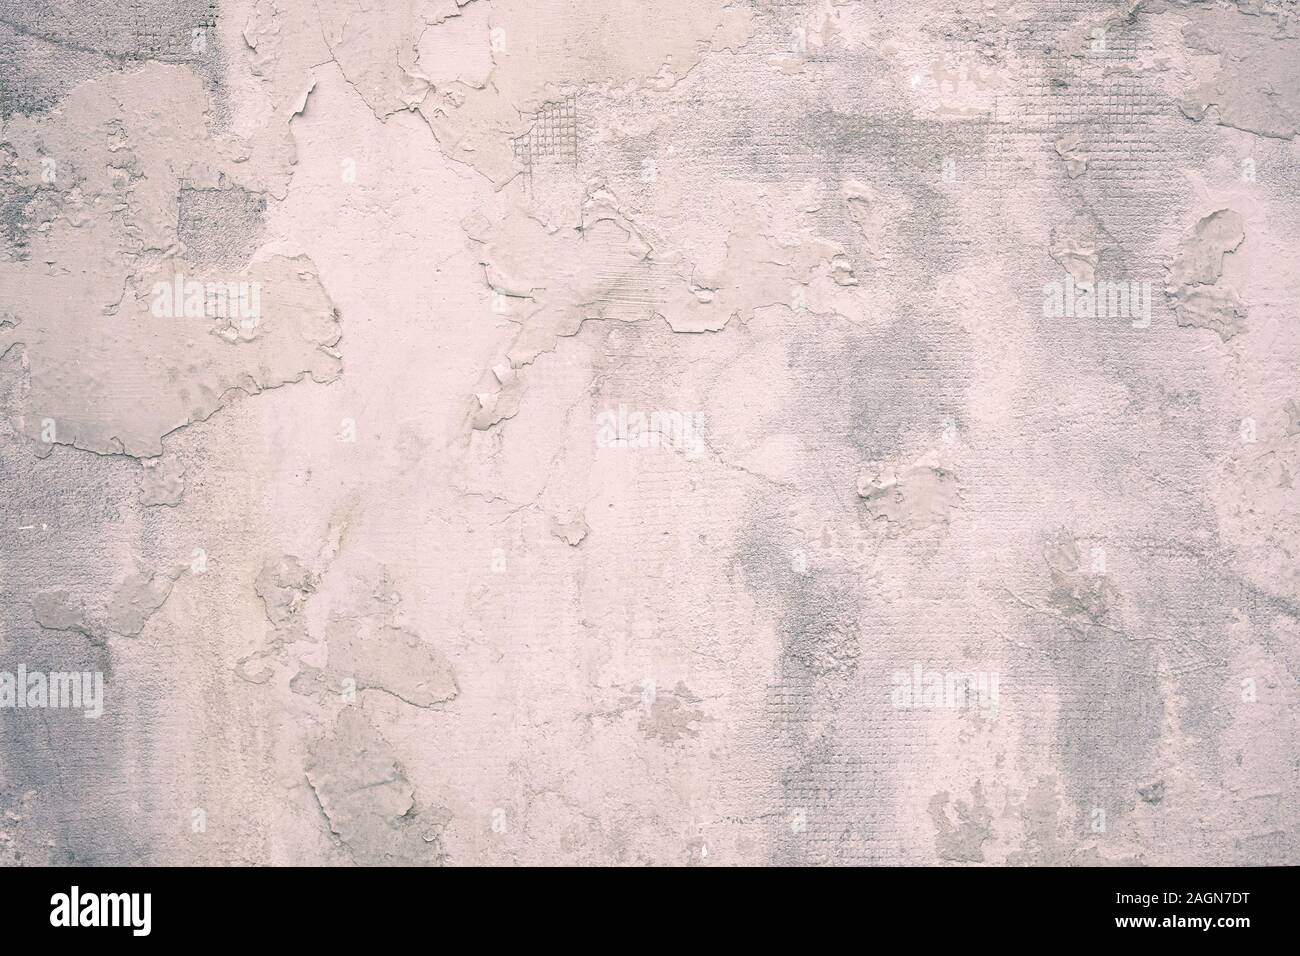 Plastered wall. Gray texture background. Texture of old plaster wall. Cement wall have copy space for text. Toned image. Stock Photo